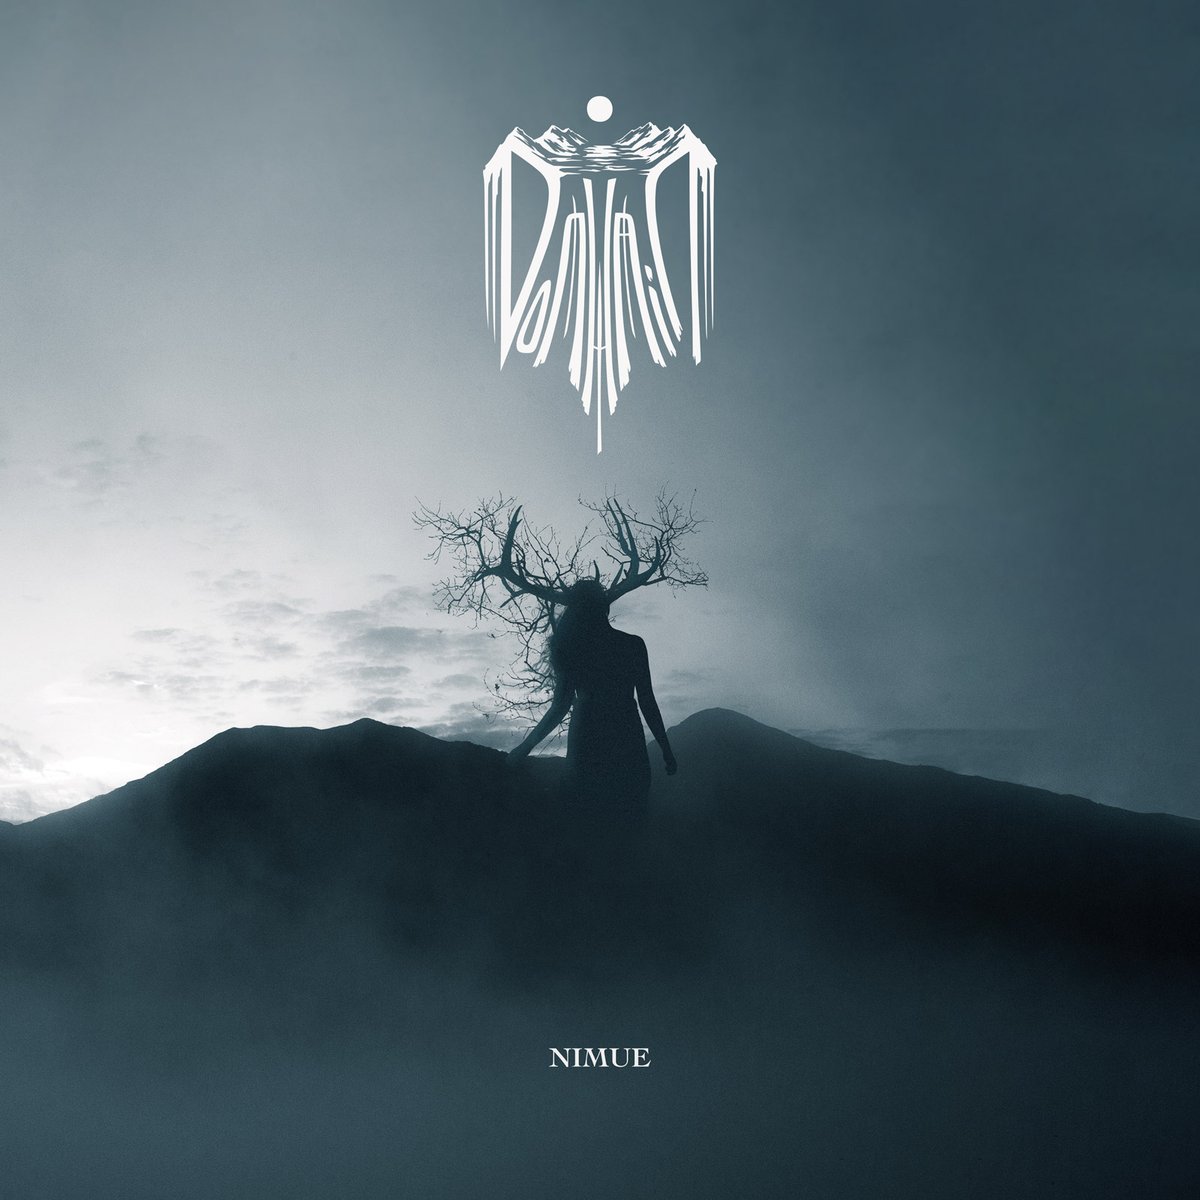 Domhain - Nimue (Full EP Premiere)

Atmospheric Post-Black Metal / Post-Metal / Post-Rock from Ireland. 

EP Premiere at 15:00 CET 
▶ youtu.be/WTkhE1jEd5s

#blackmetal #blackmetalpromotion 
#atmosphericblackmetal
#irishblackmetal
#postblackmetal
#postmetal
#postrock